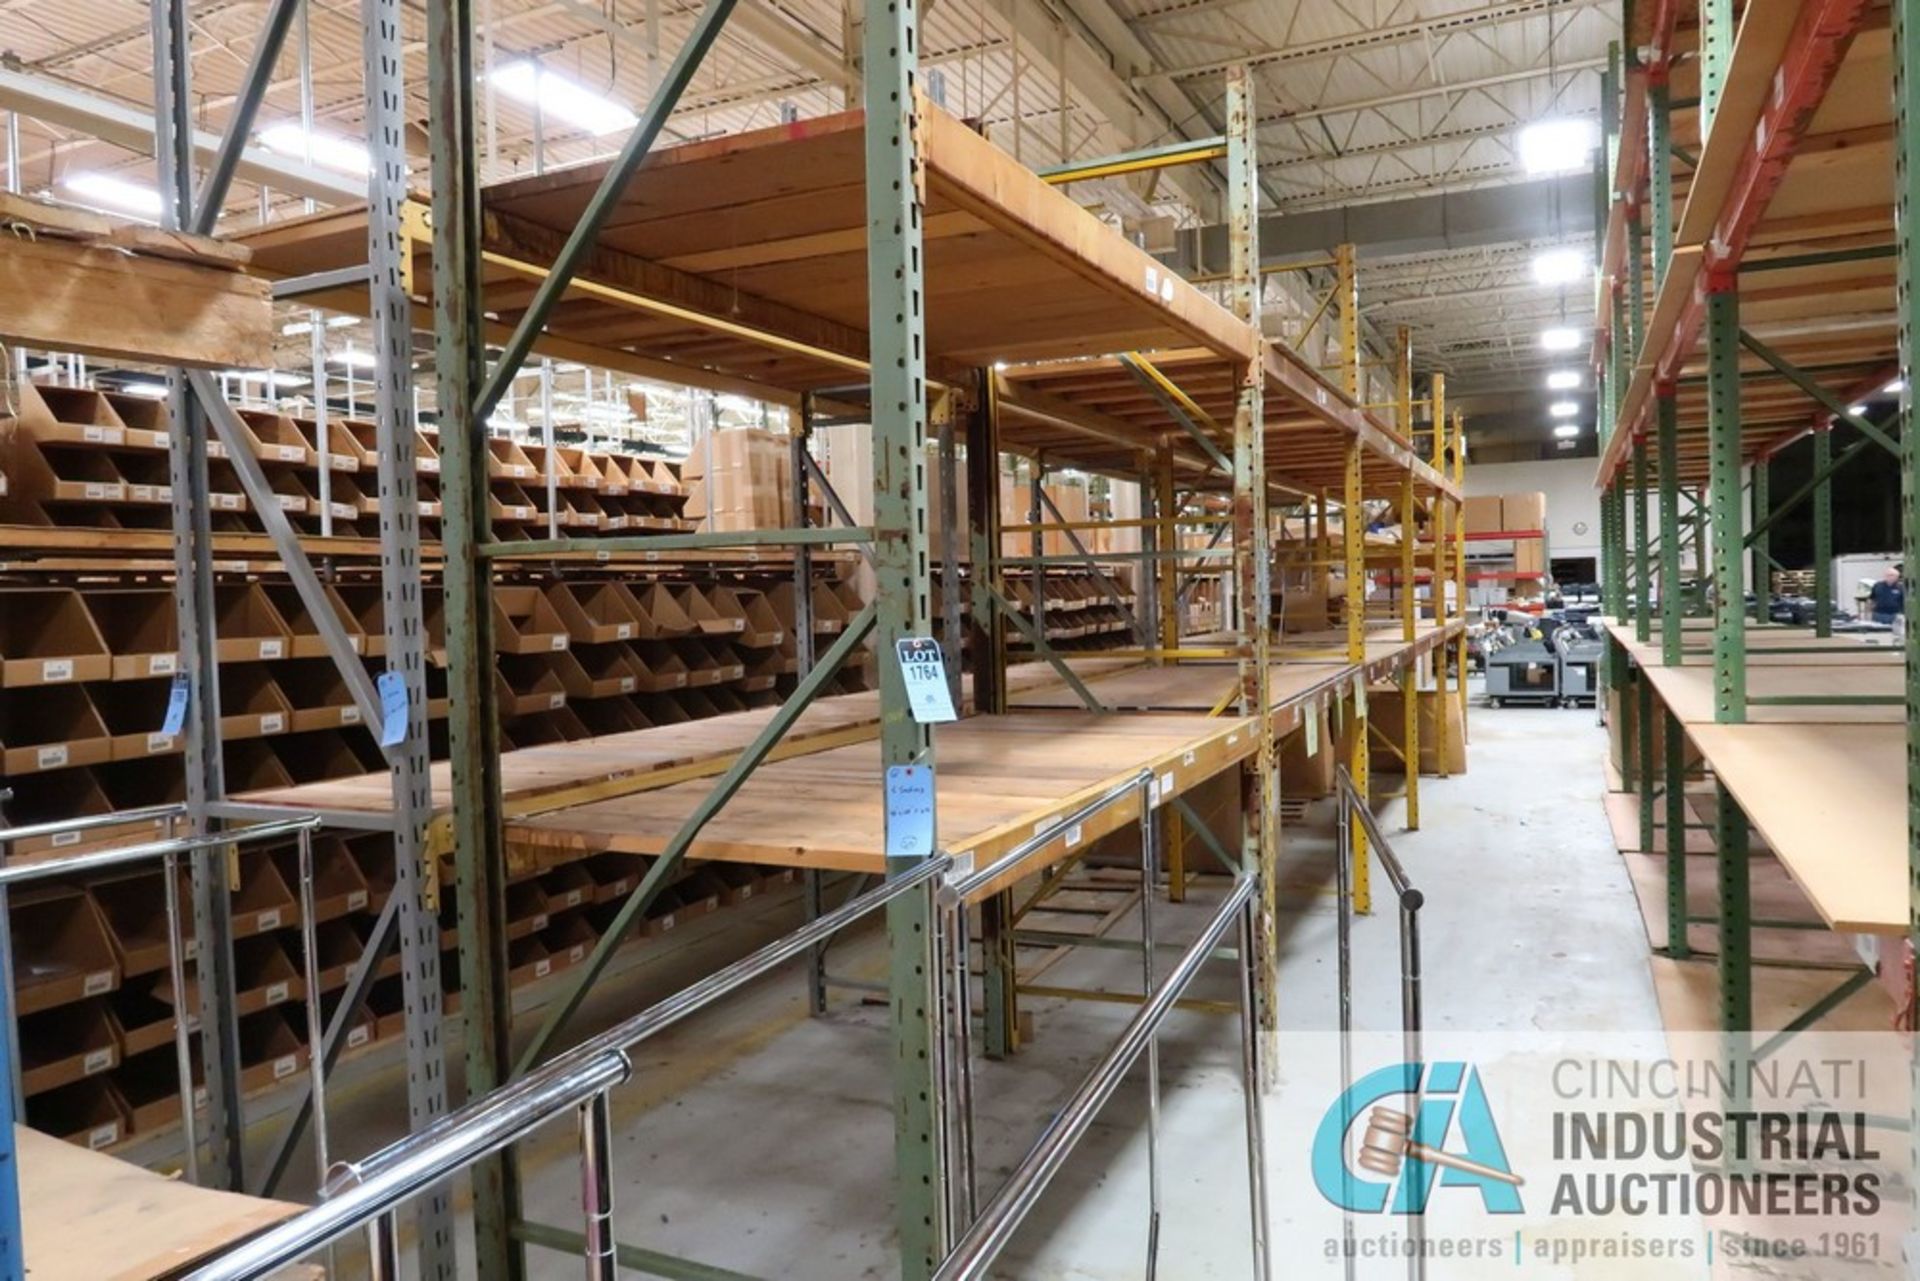 SECTIONS 44-1/2" X 100" X 12' PALLET RACK, (2) SHELVES PER SECTION WITH (20) BEAMS AND (6) SHEETS 4'